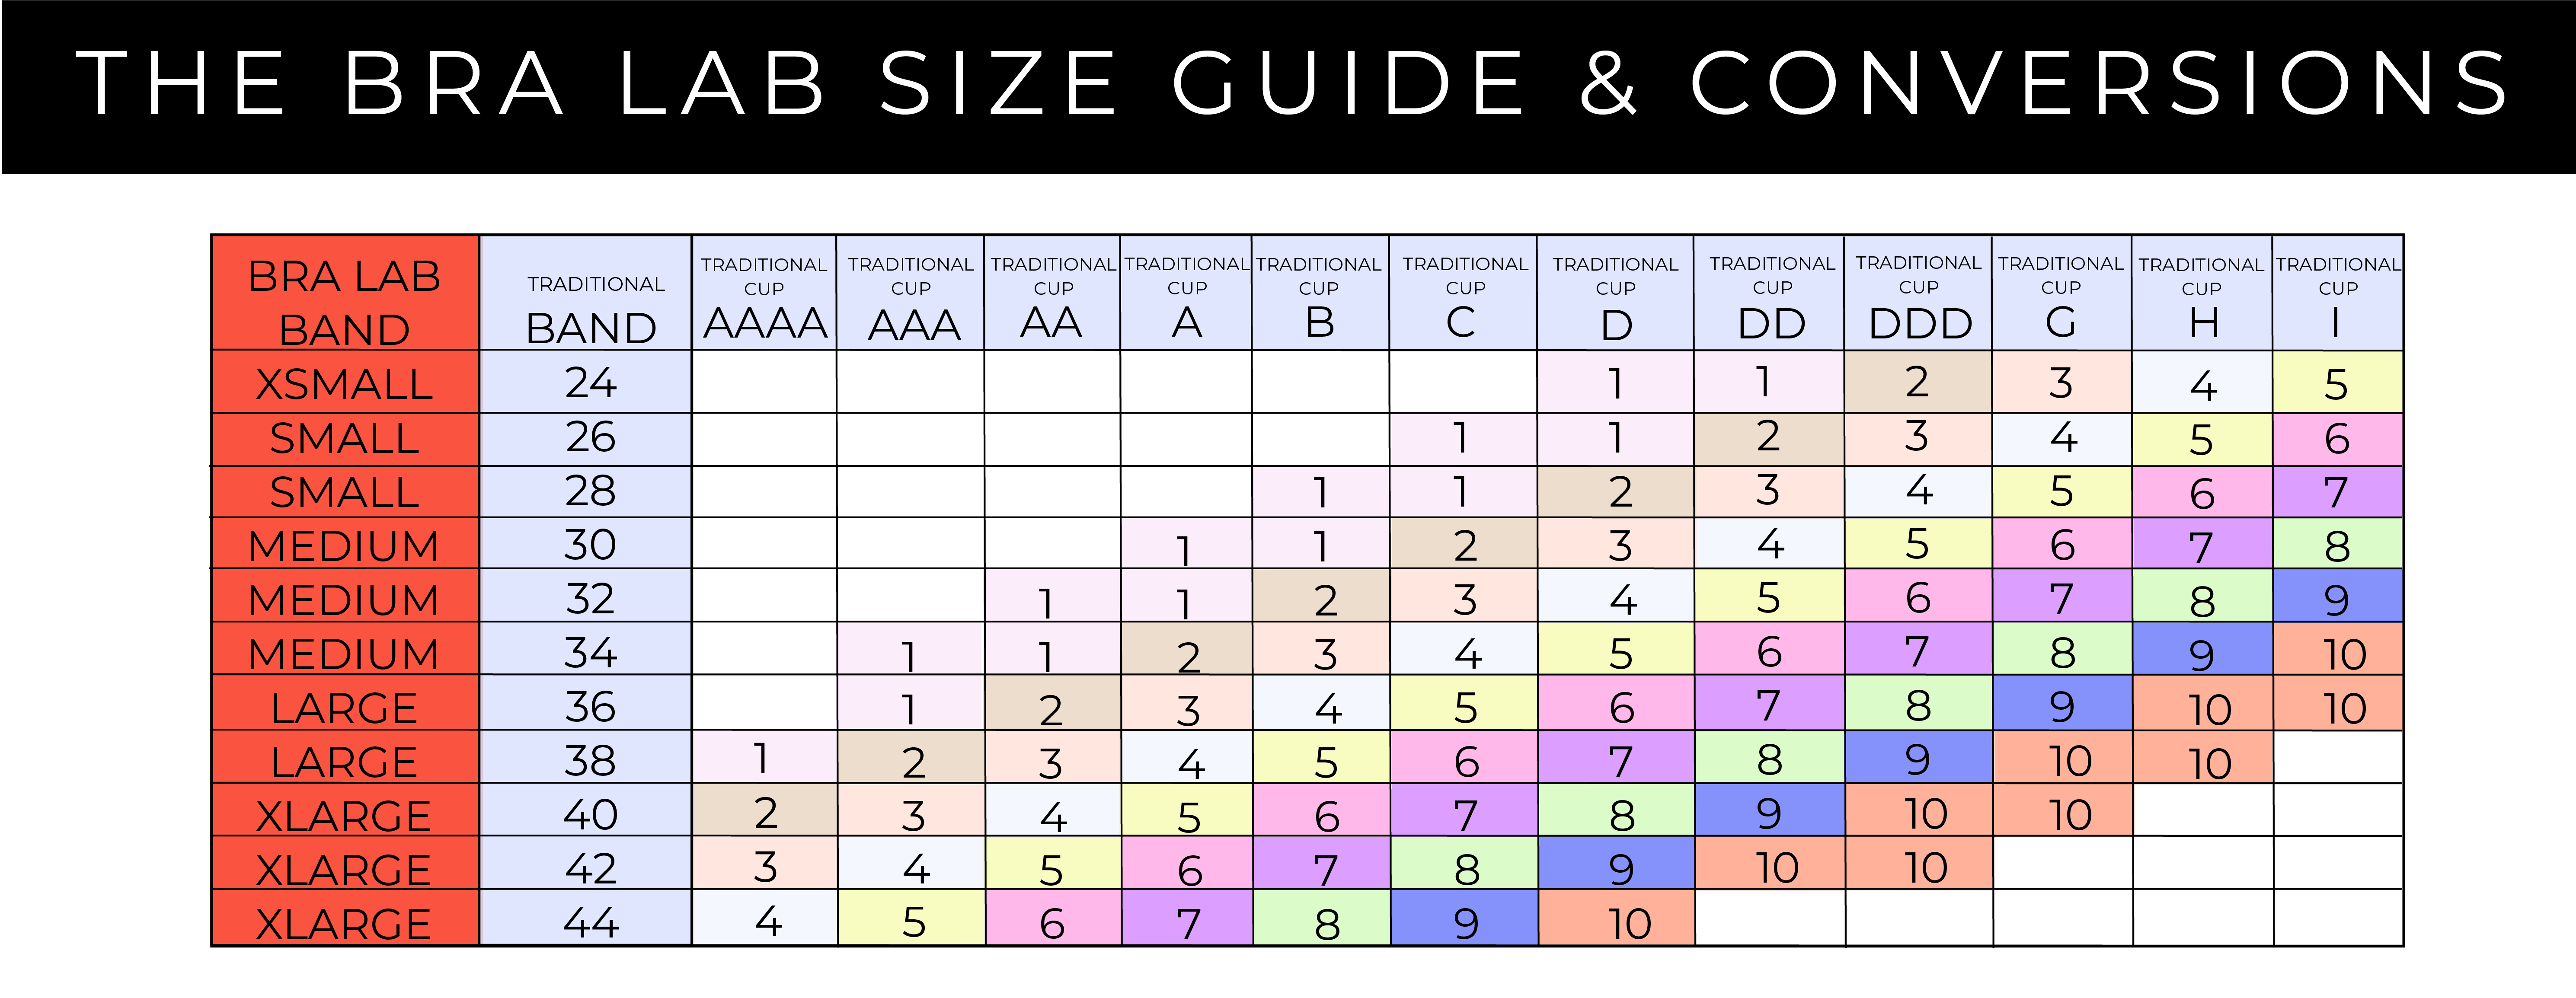 Finding a D+ Bra that Fits , Universal Cup Size UCS , HerRoom